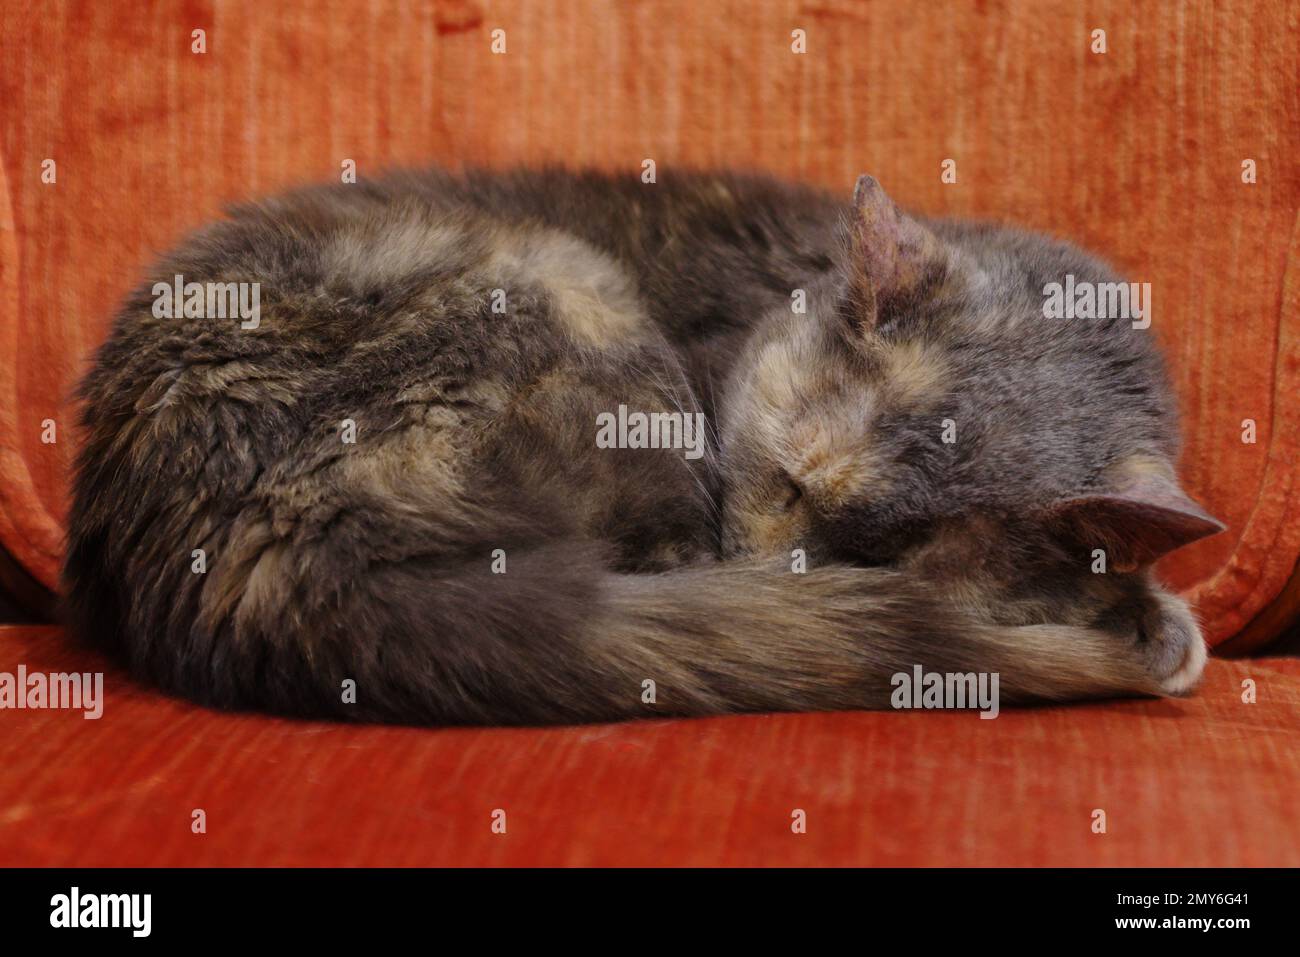 Sleeping cat in a chair. Stock Photo